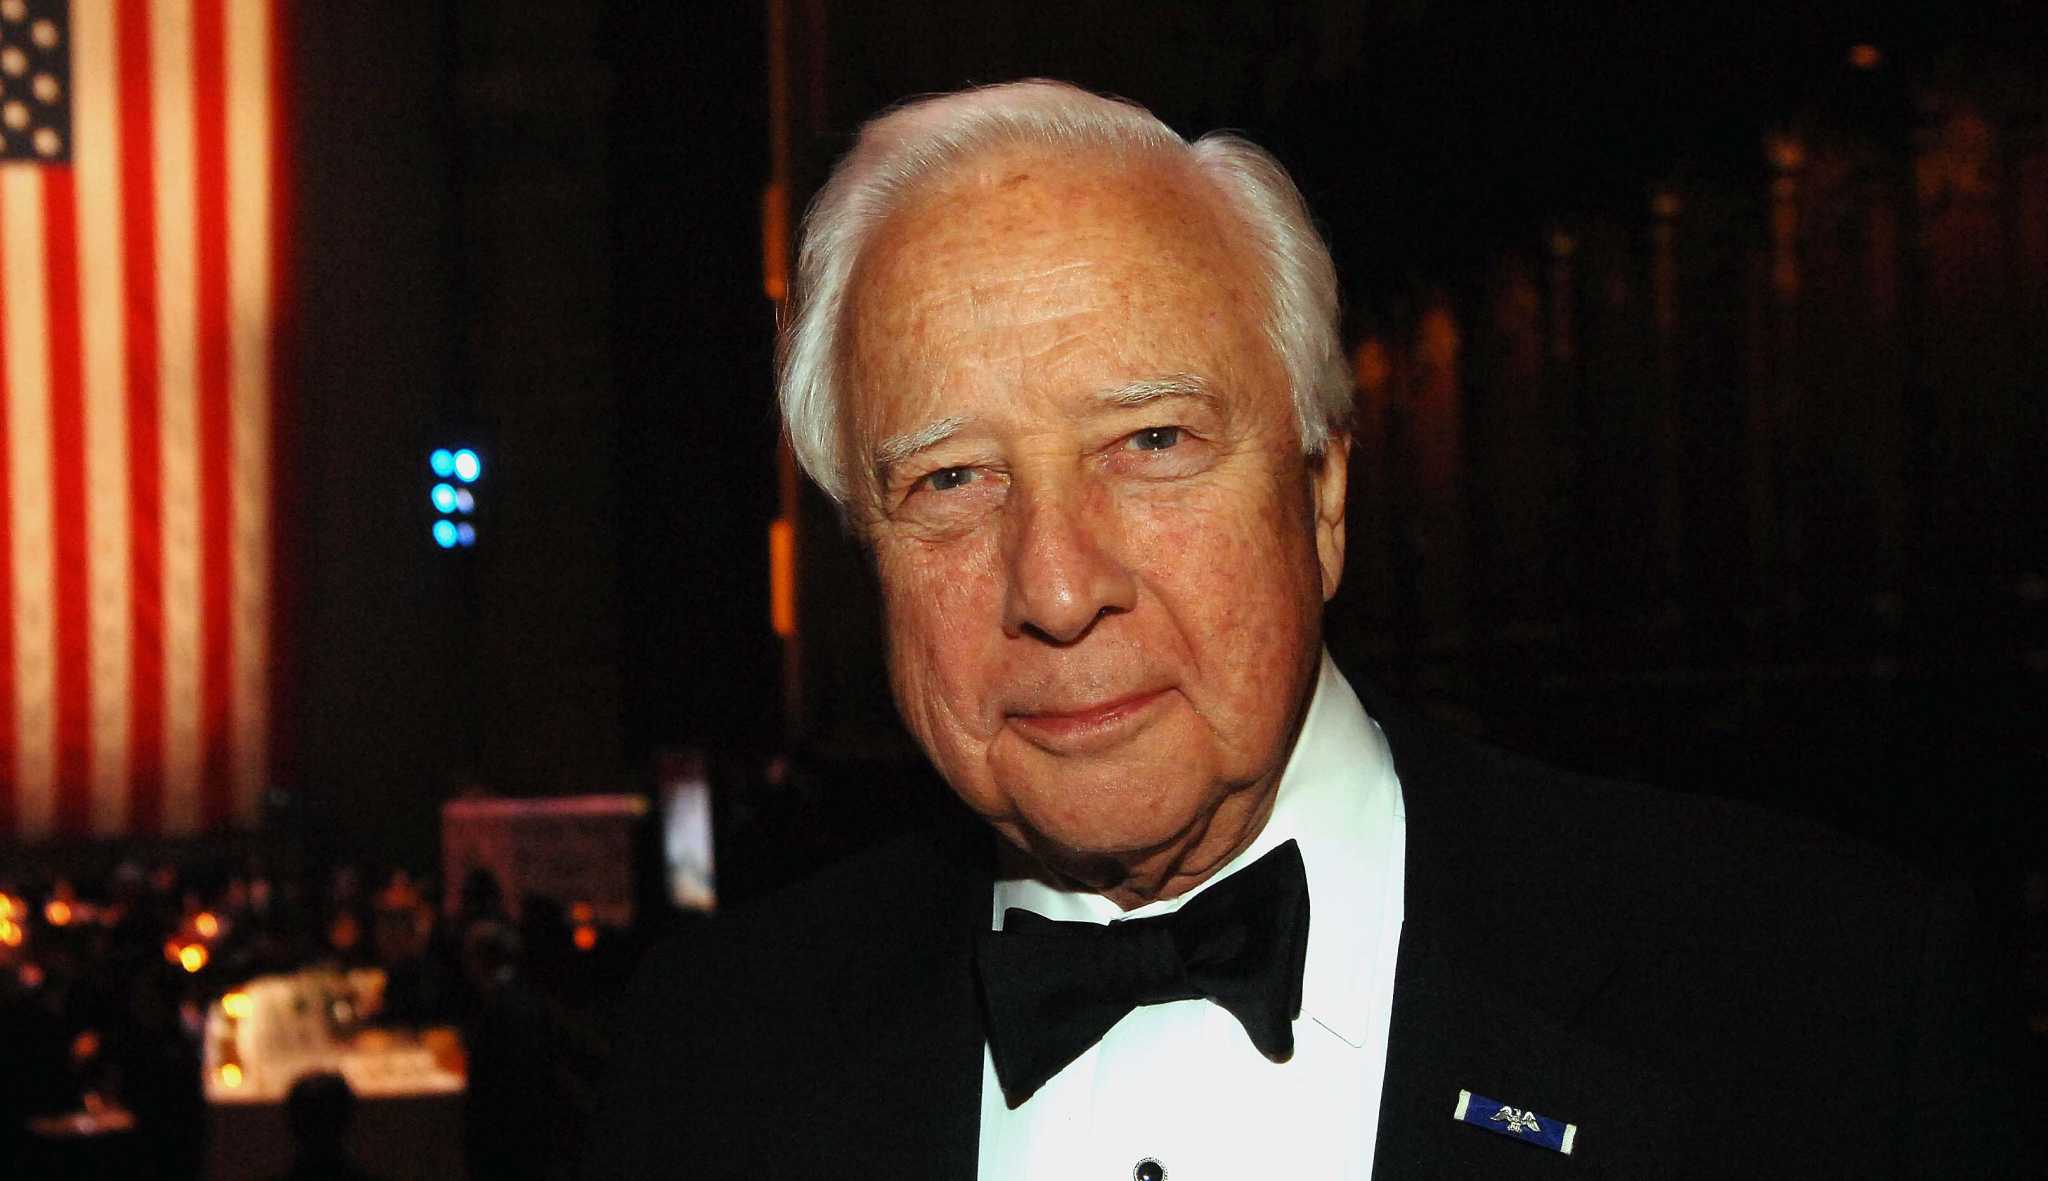 David McCullough, Two-Time Pulitzer Prize-Winning Author, Dies at 89